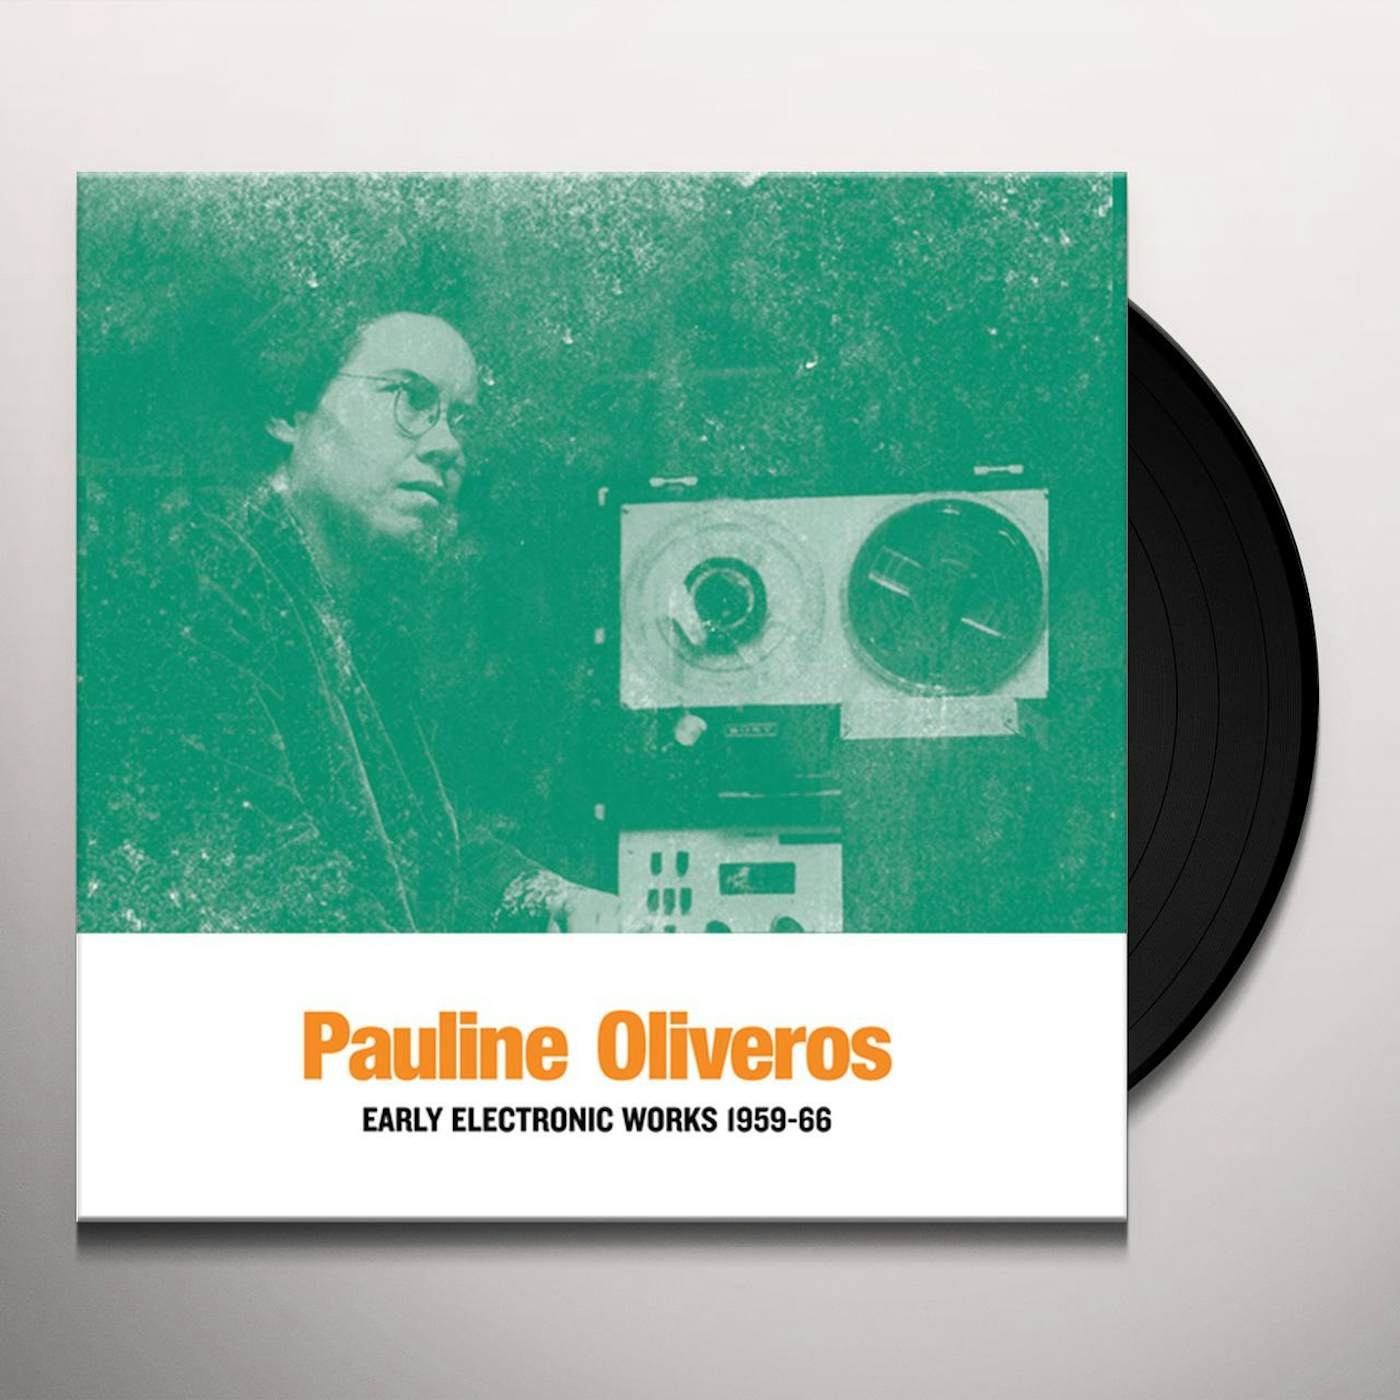 Pauline Oliveros EARLY ELECTRONIC WORKS 1959-66 Vinyl Record